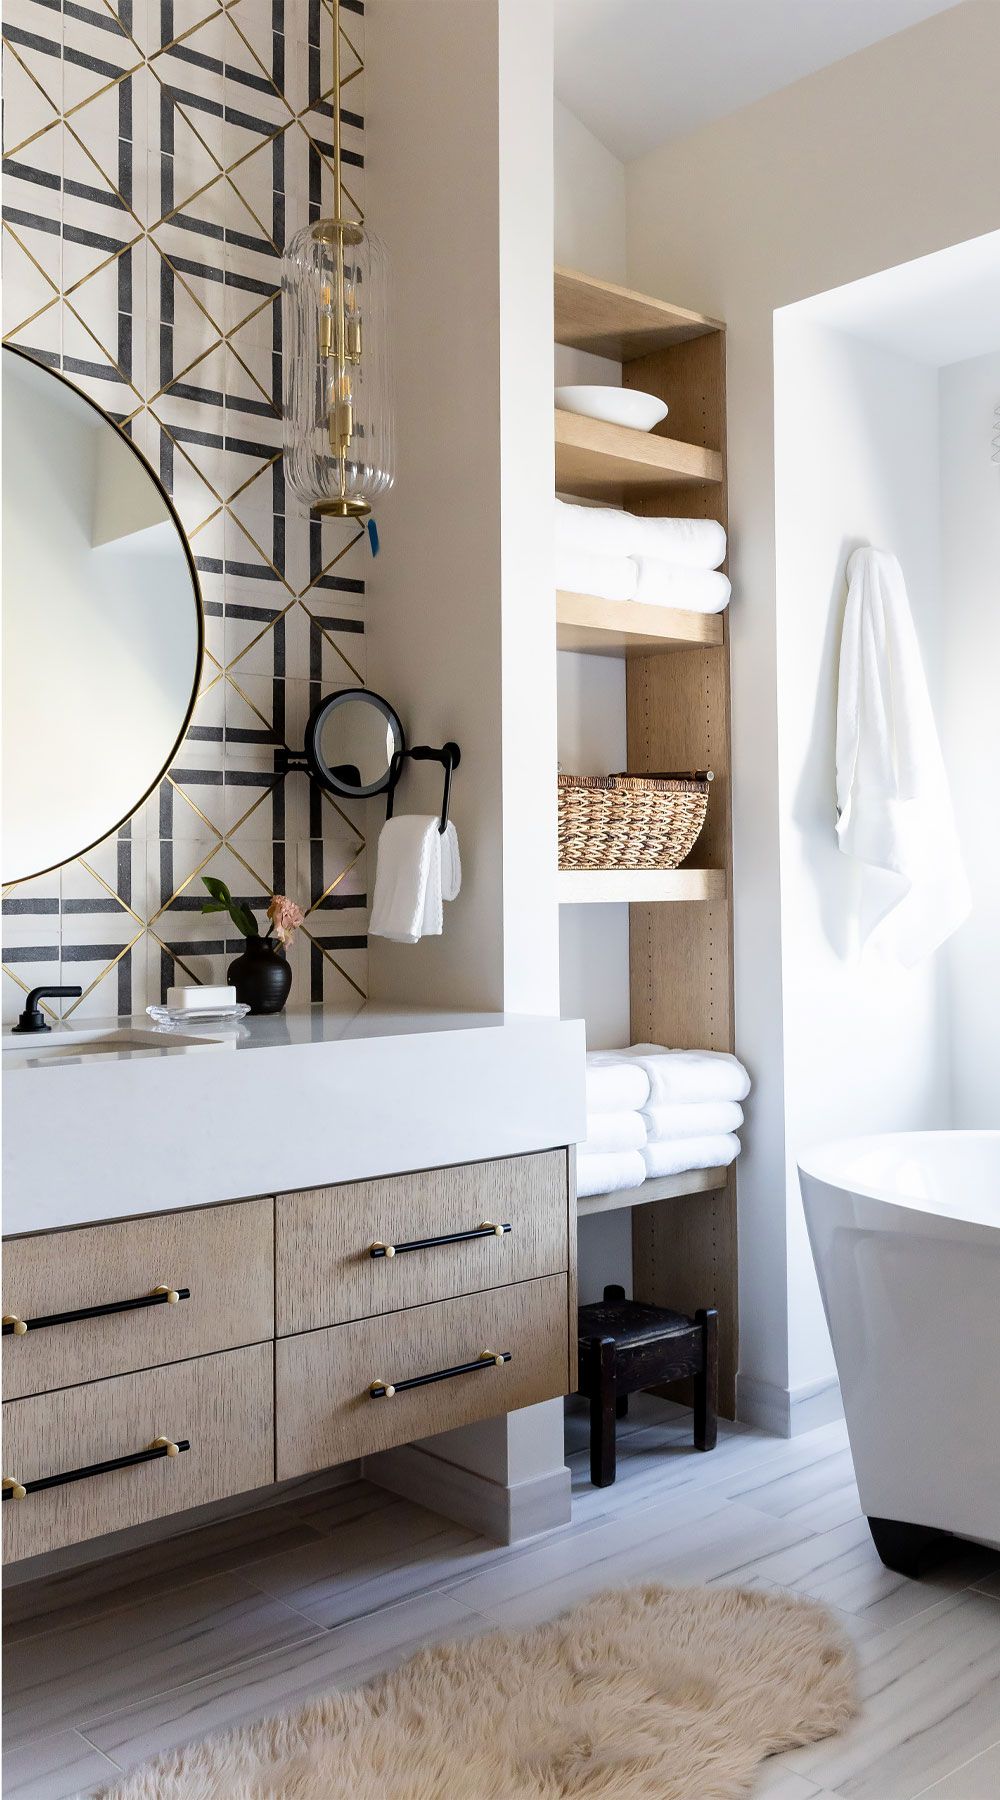 Bathroom Vanities: Stylish and Functional Solutions for Your Bathroom